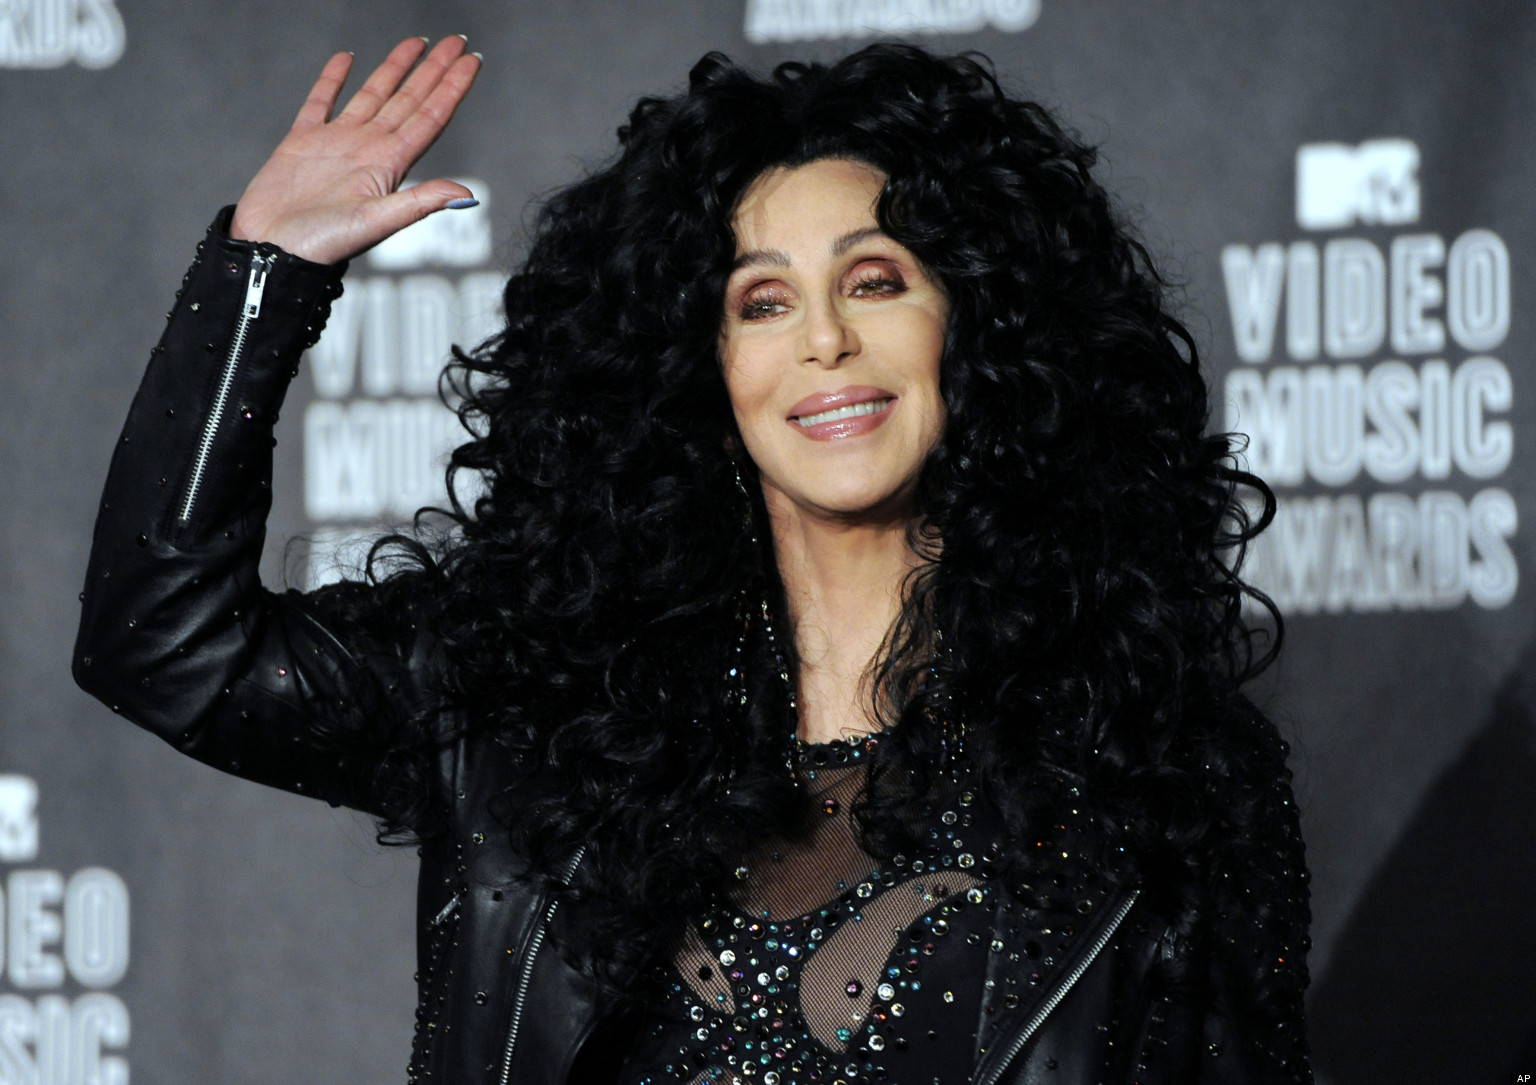 HD Quality Wallpaper | Collection: Music, 1536x1085 Cher